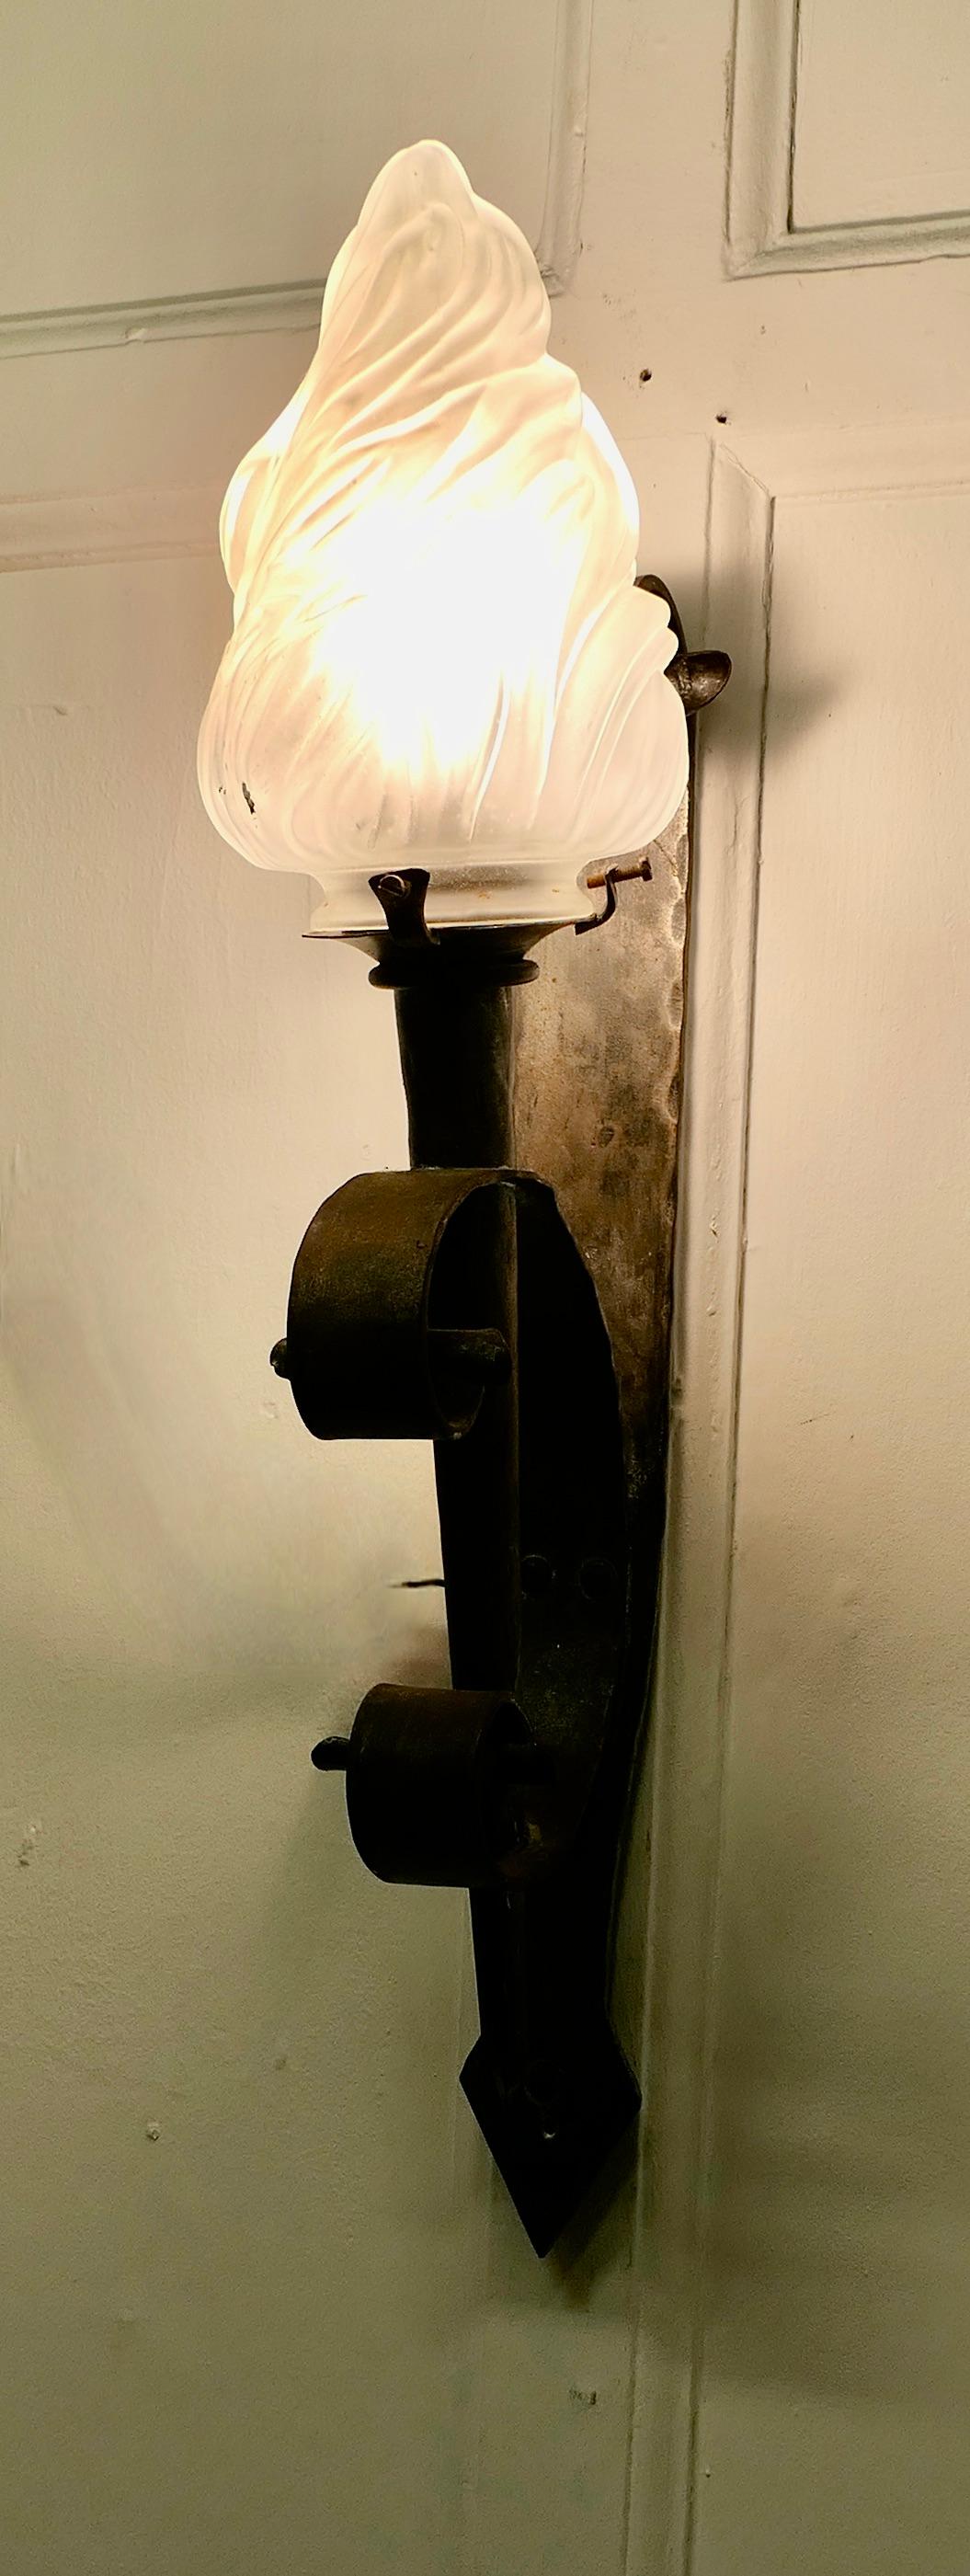 A Superb French Gothic Iron Wall Light

A very handsome Large Heavy French wall light, the light is set at a slight incline and would enhance the entrance of any Gothic Doorway or light a Castle Porch, it is in good condition and working

The Light